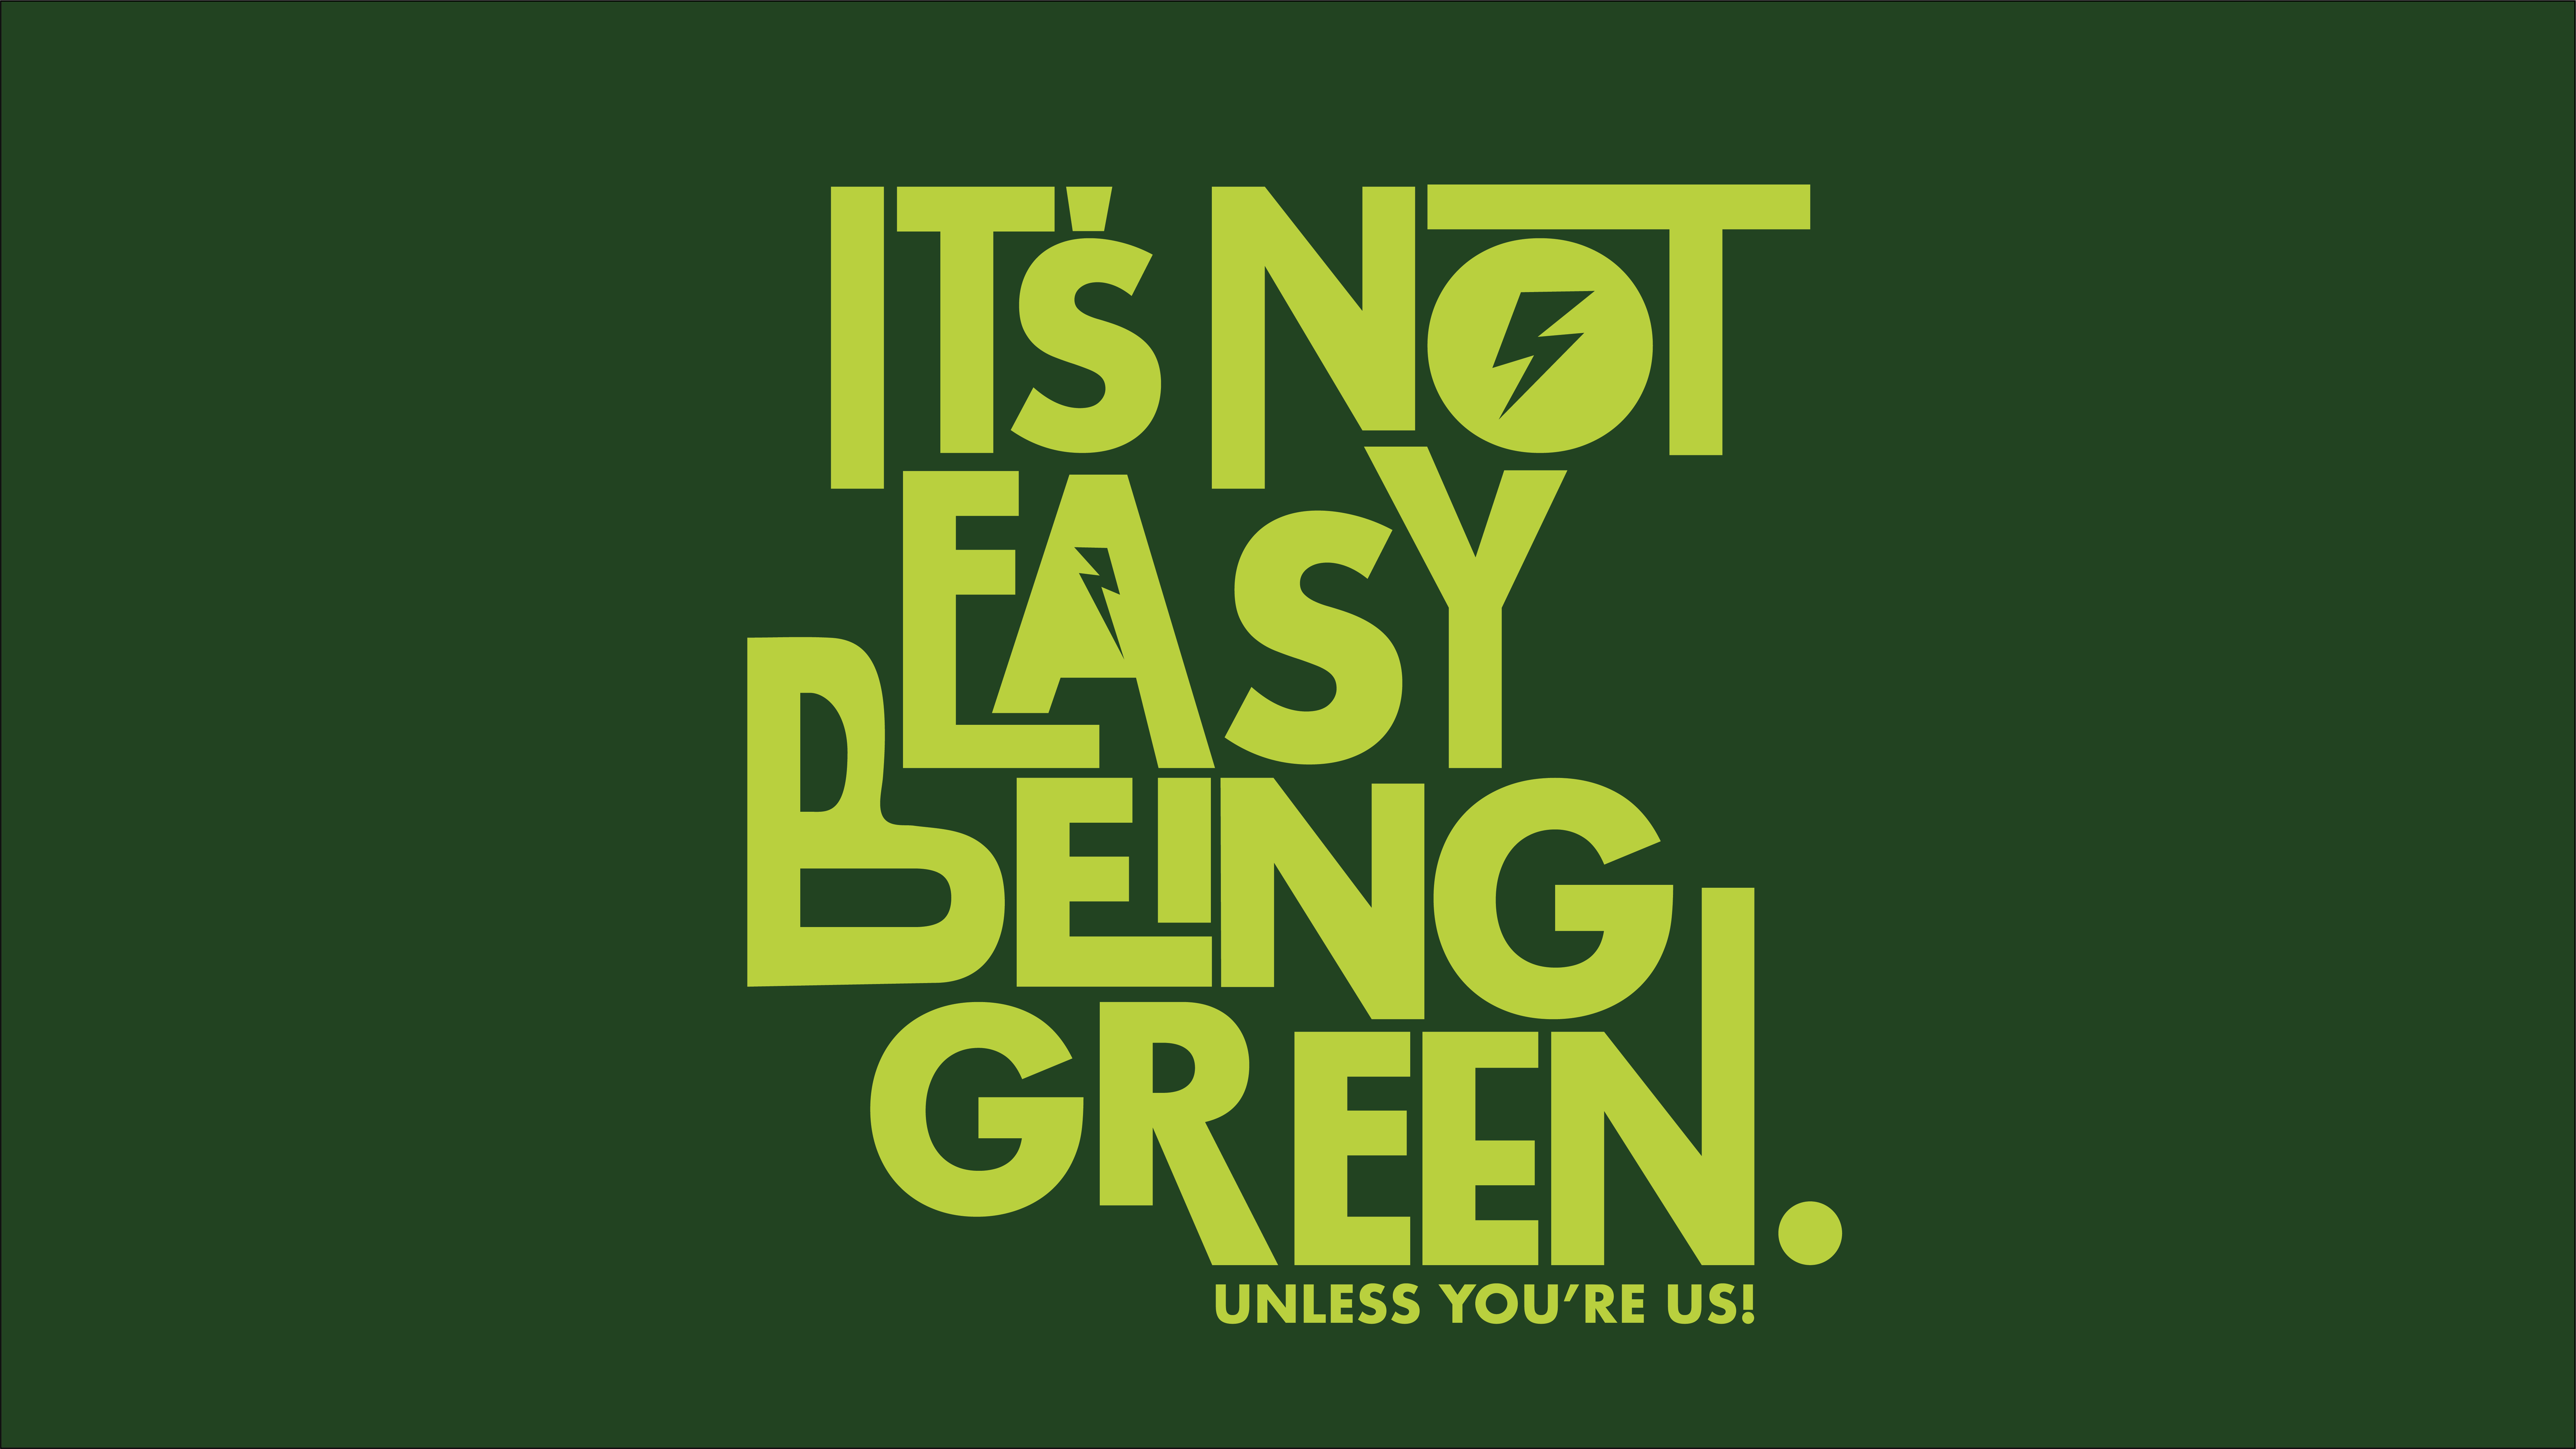 Video by Lois Brandon showing dynamic type and moving image. Thumbnail shows 'It's Not Easy Being Green' in large text with 'unless you're us!' in small text below, text is in light green on a dark green background.